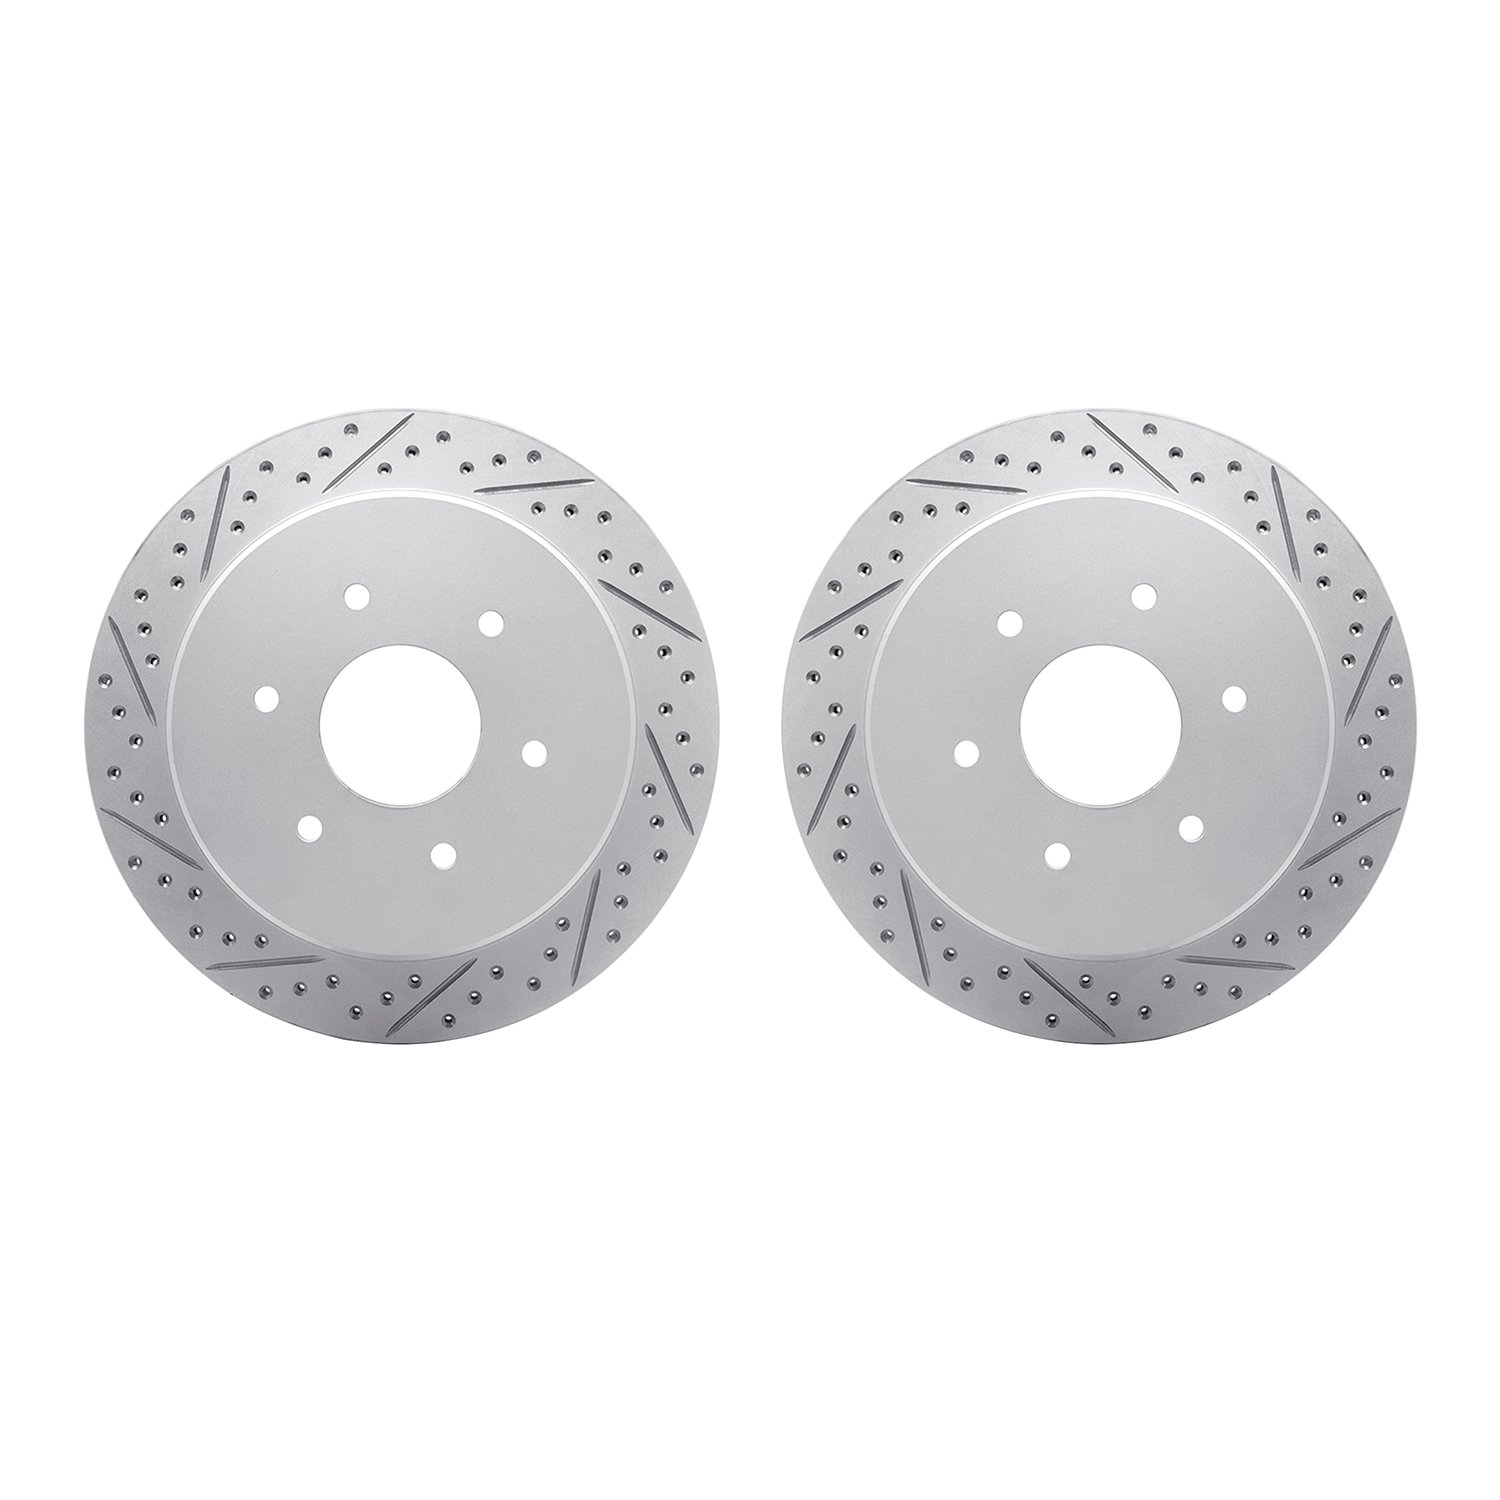 2002-67061 Geoperformance Drilled/Slotted Brake Rotors, Fits Select Infiniti/Nissan, Position: Rear